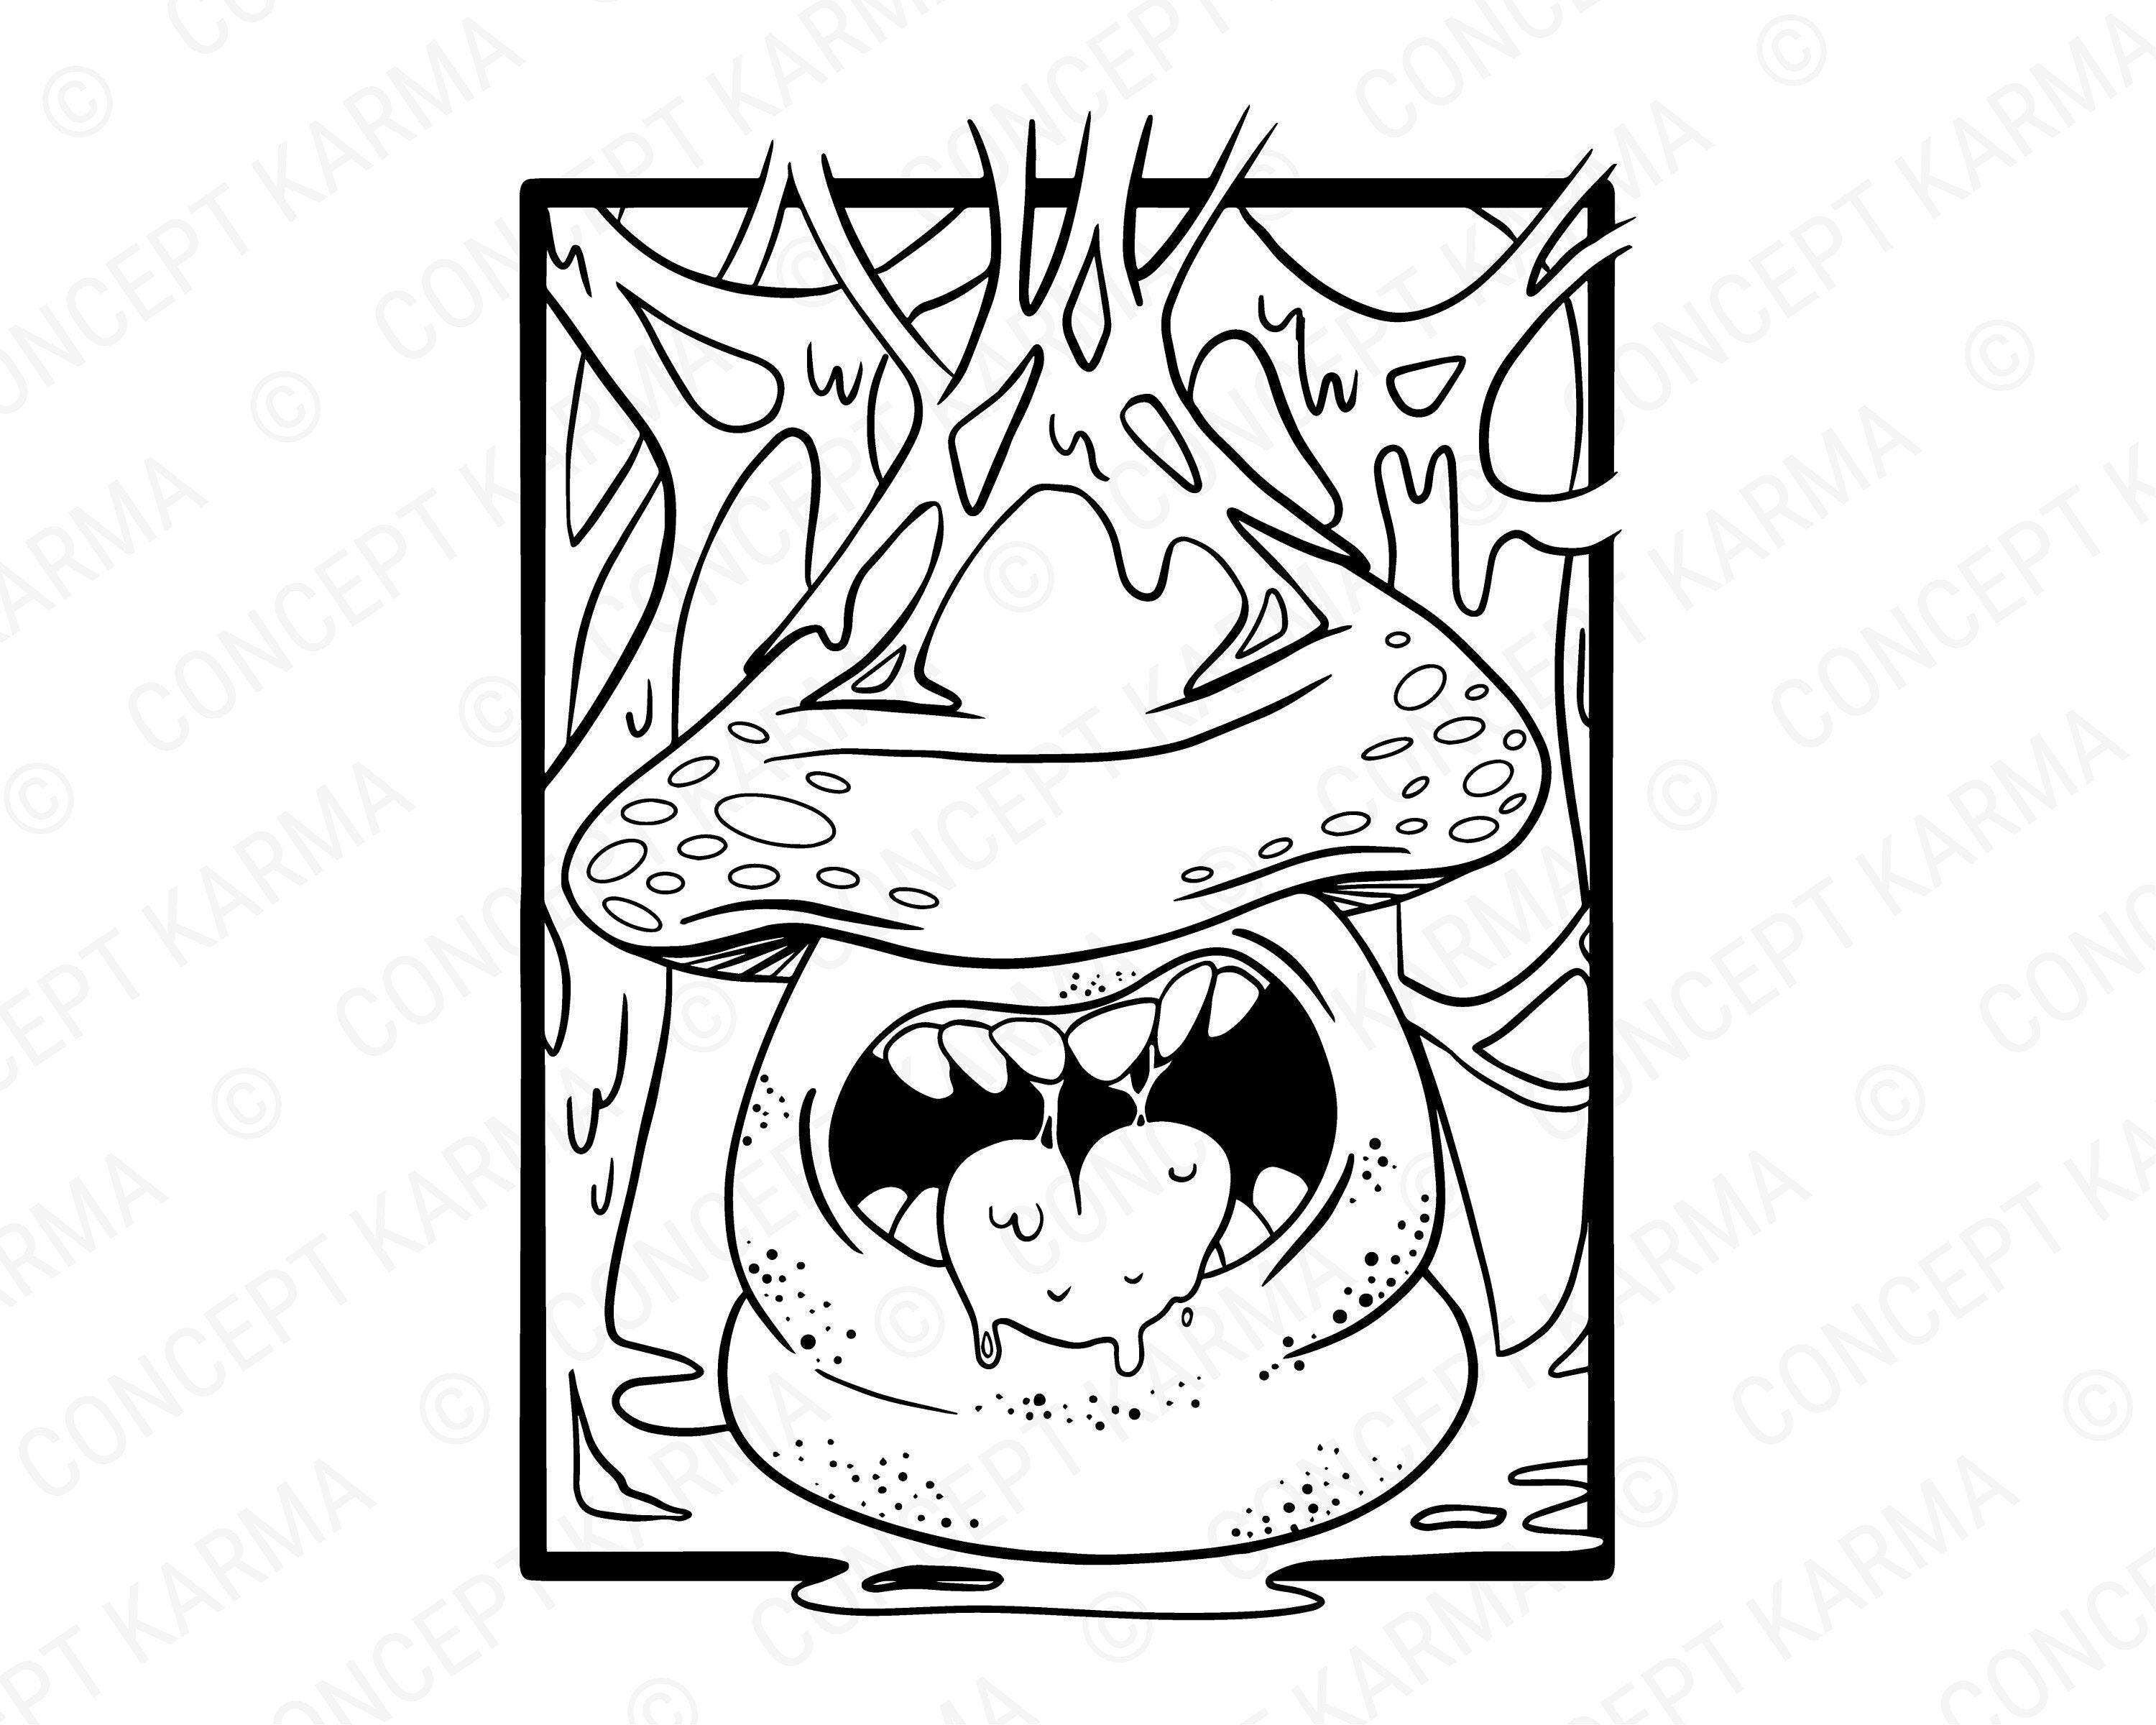 Cute Minecraft Slime Coloring Pages - Get Coloring Pages